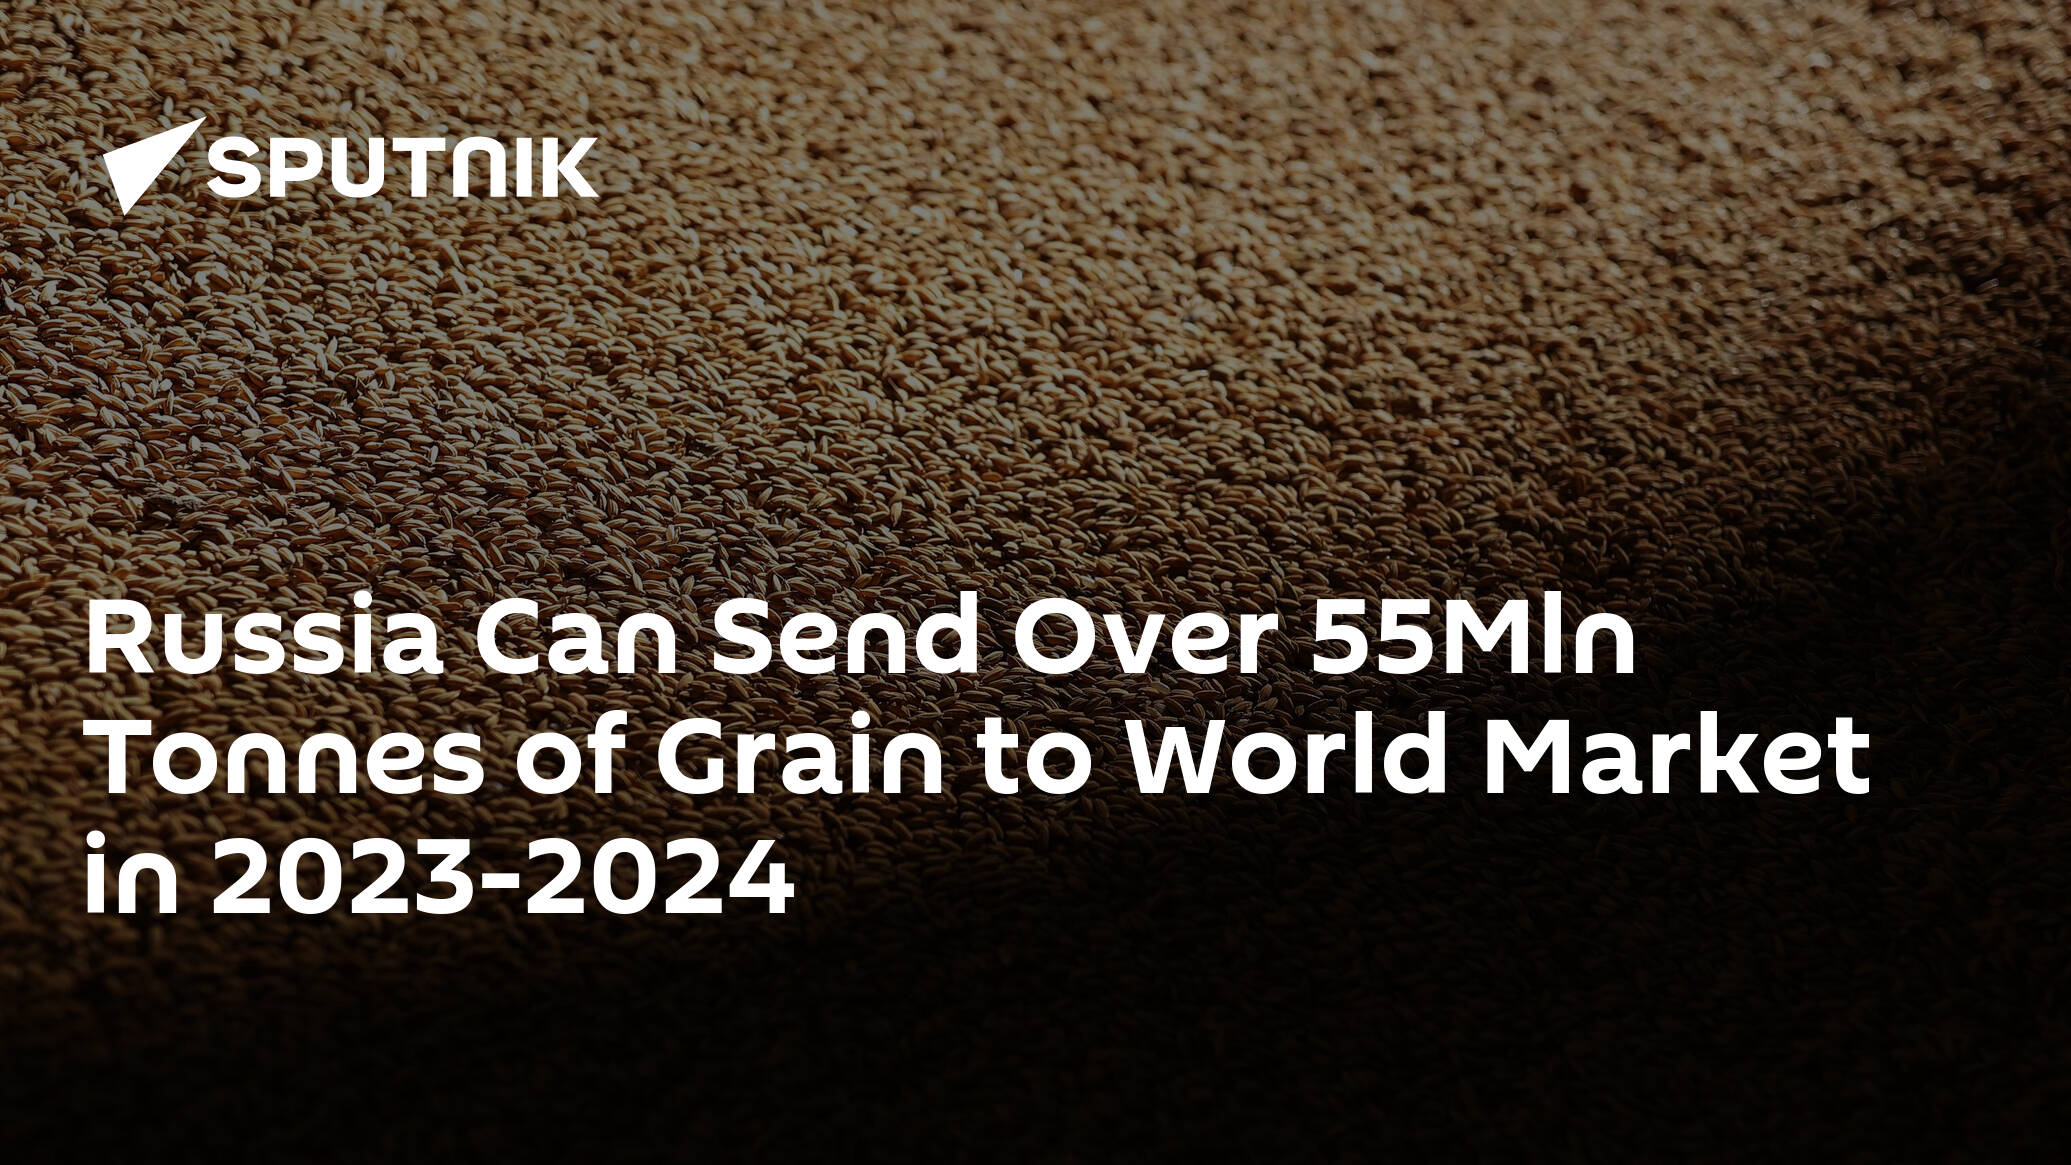 Russia Can Send Over 55Mln Tonnes of Grain to World Market in 2023-2024